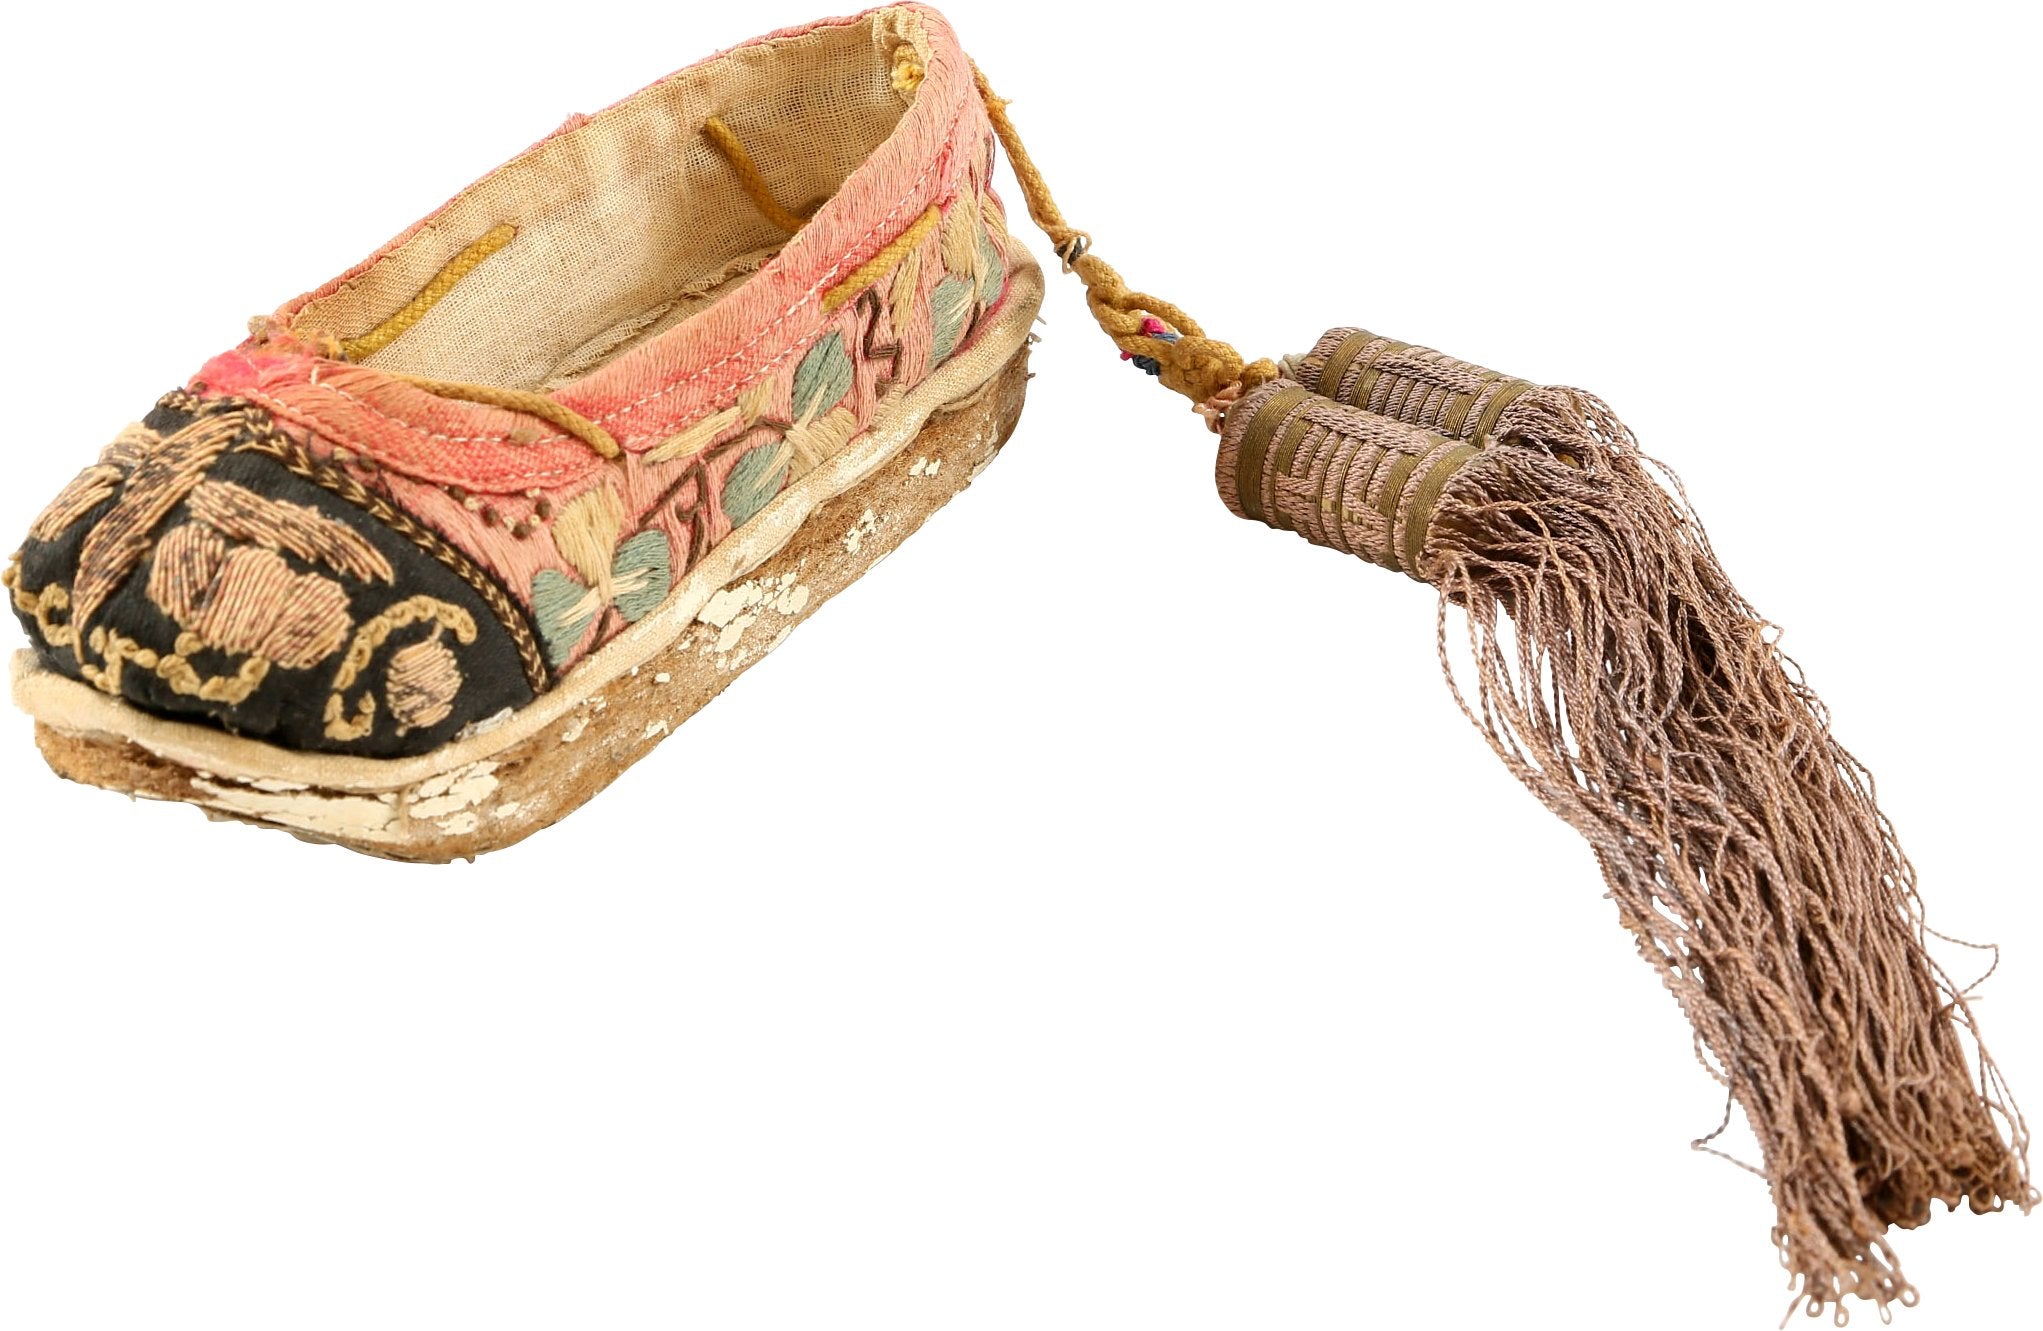 CHINESE WOMAN’S SHOE FOR FOOT BOUND FOOT. - Fagan Arms